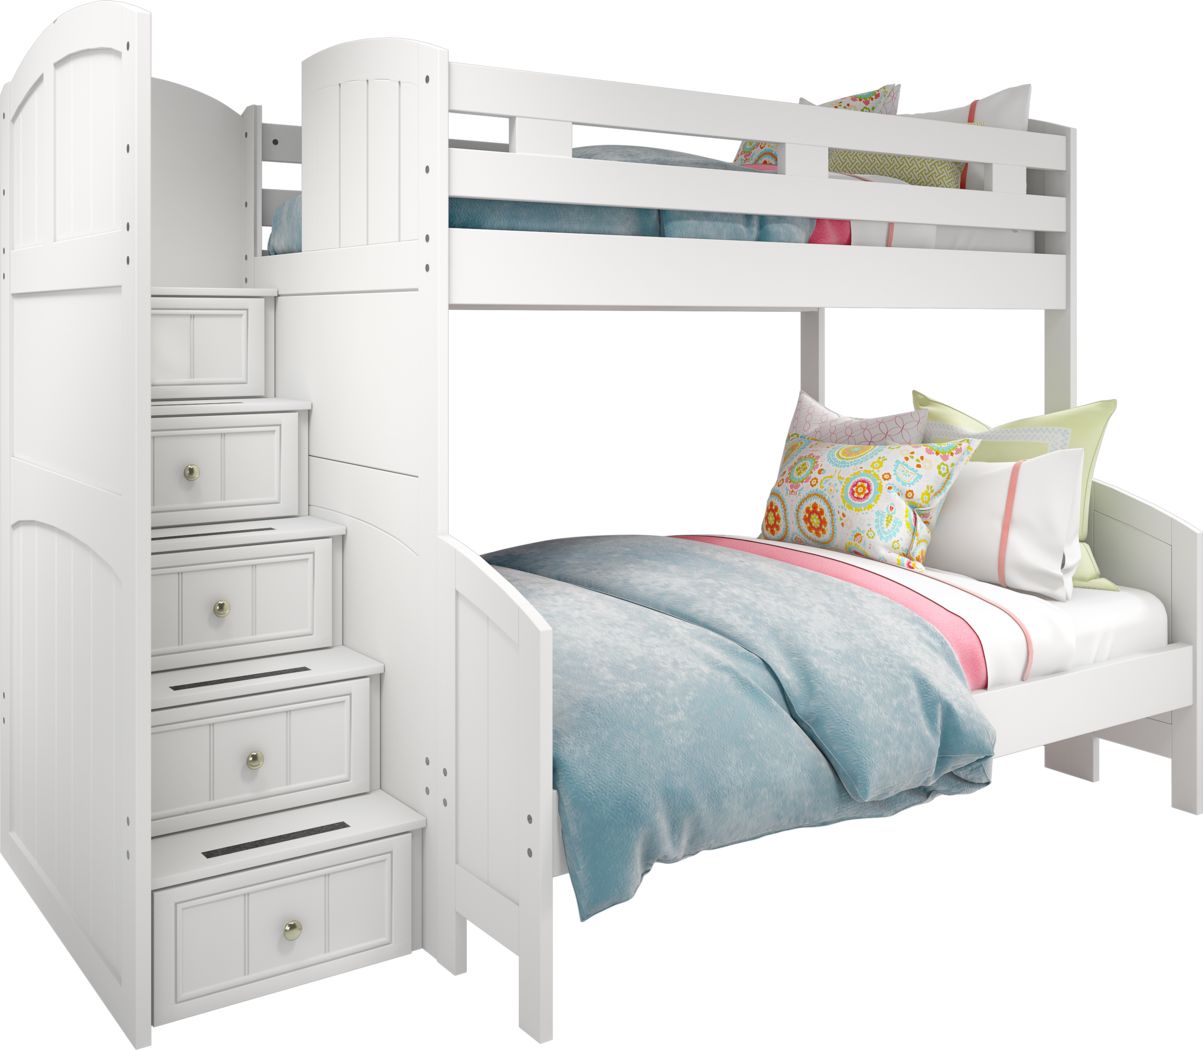 Rooms To Go White Bunk Bed For Off 63, Rooms To Go Cottage Colors Bunk Bed